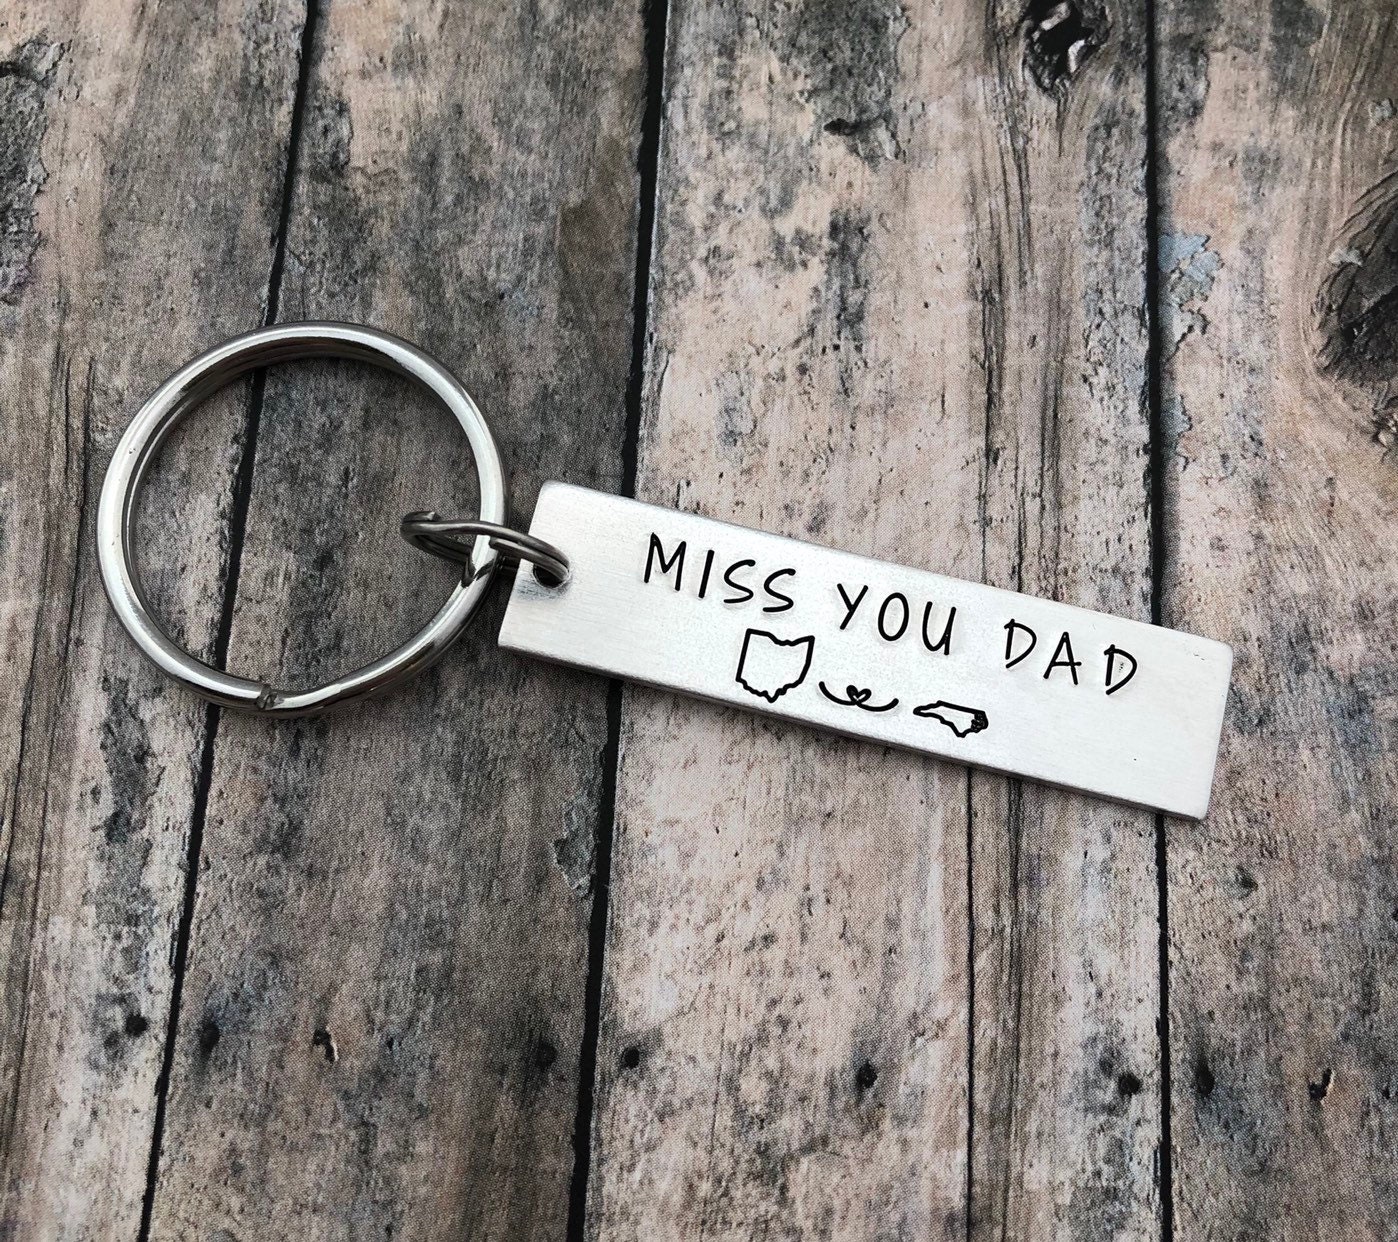 I Love You More Small Keychain With Name Personalized Hand Stamped Husband  Mother's Day Gift Father's Day Key Chain I Love You Most 